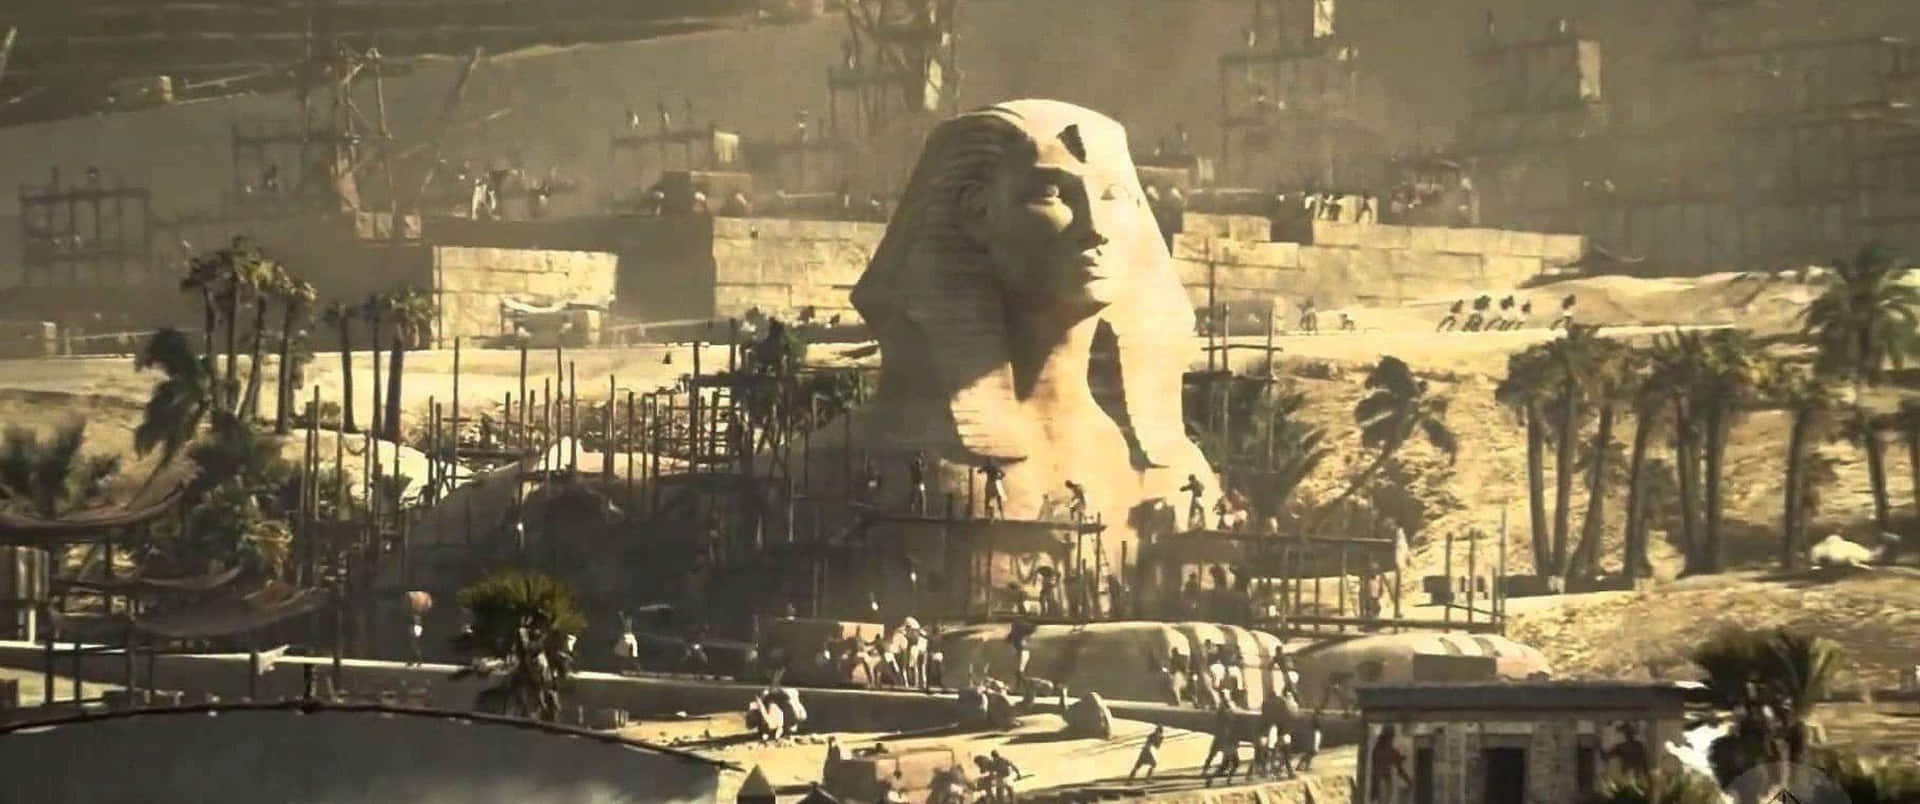 A Large Statue Of A Sphinx Is In The Middle Of A City